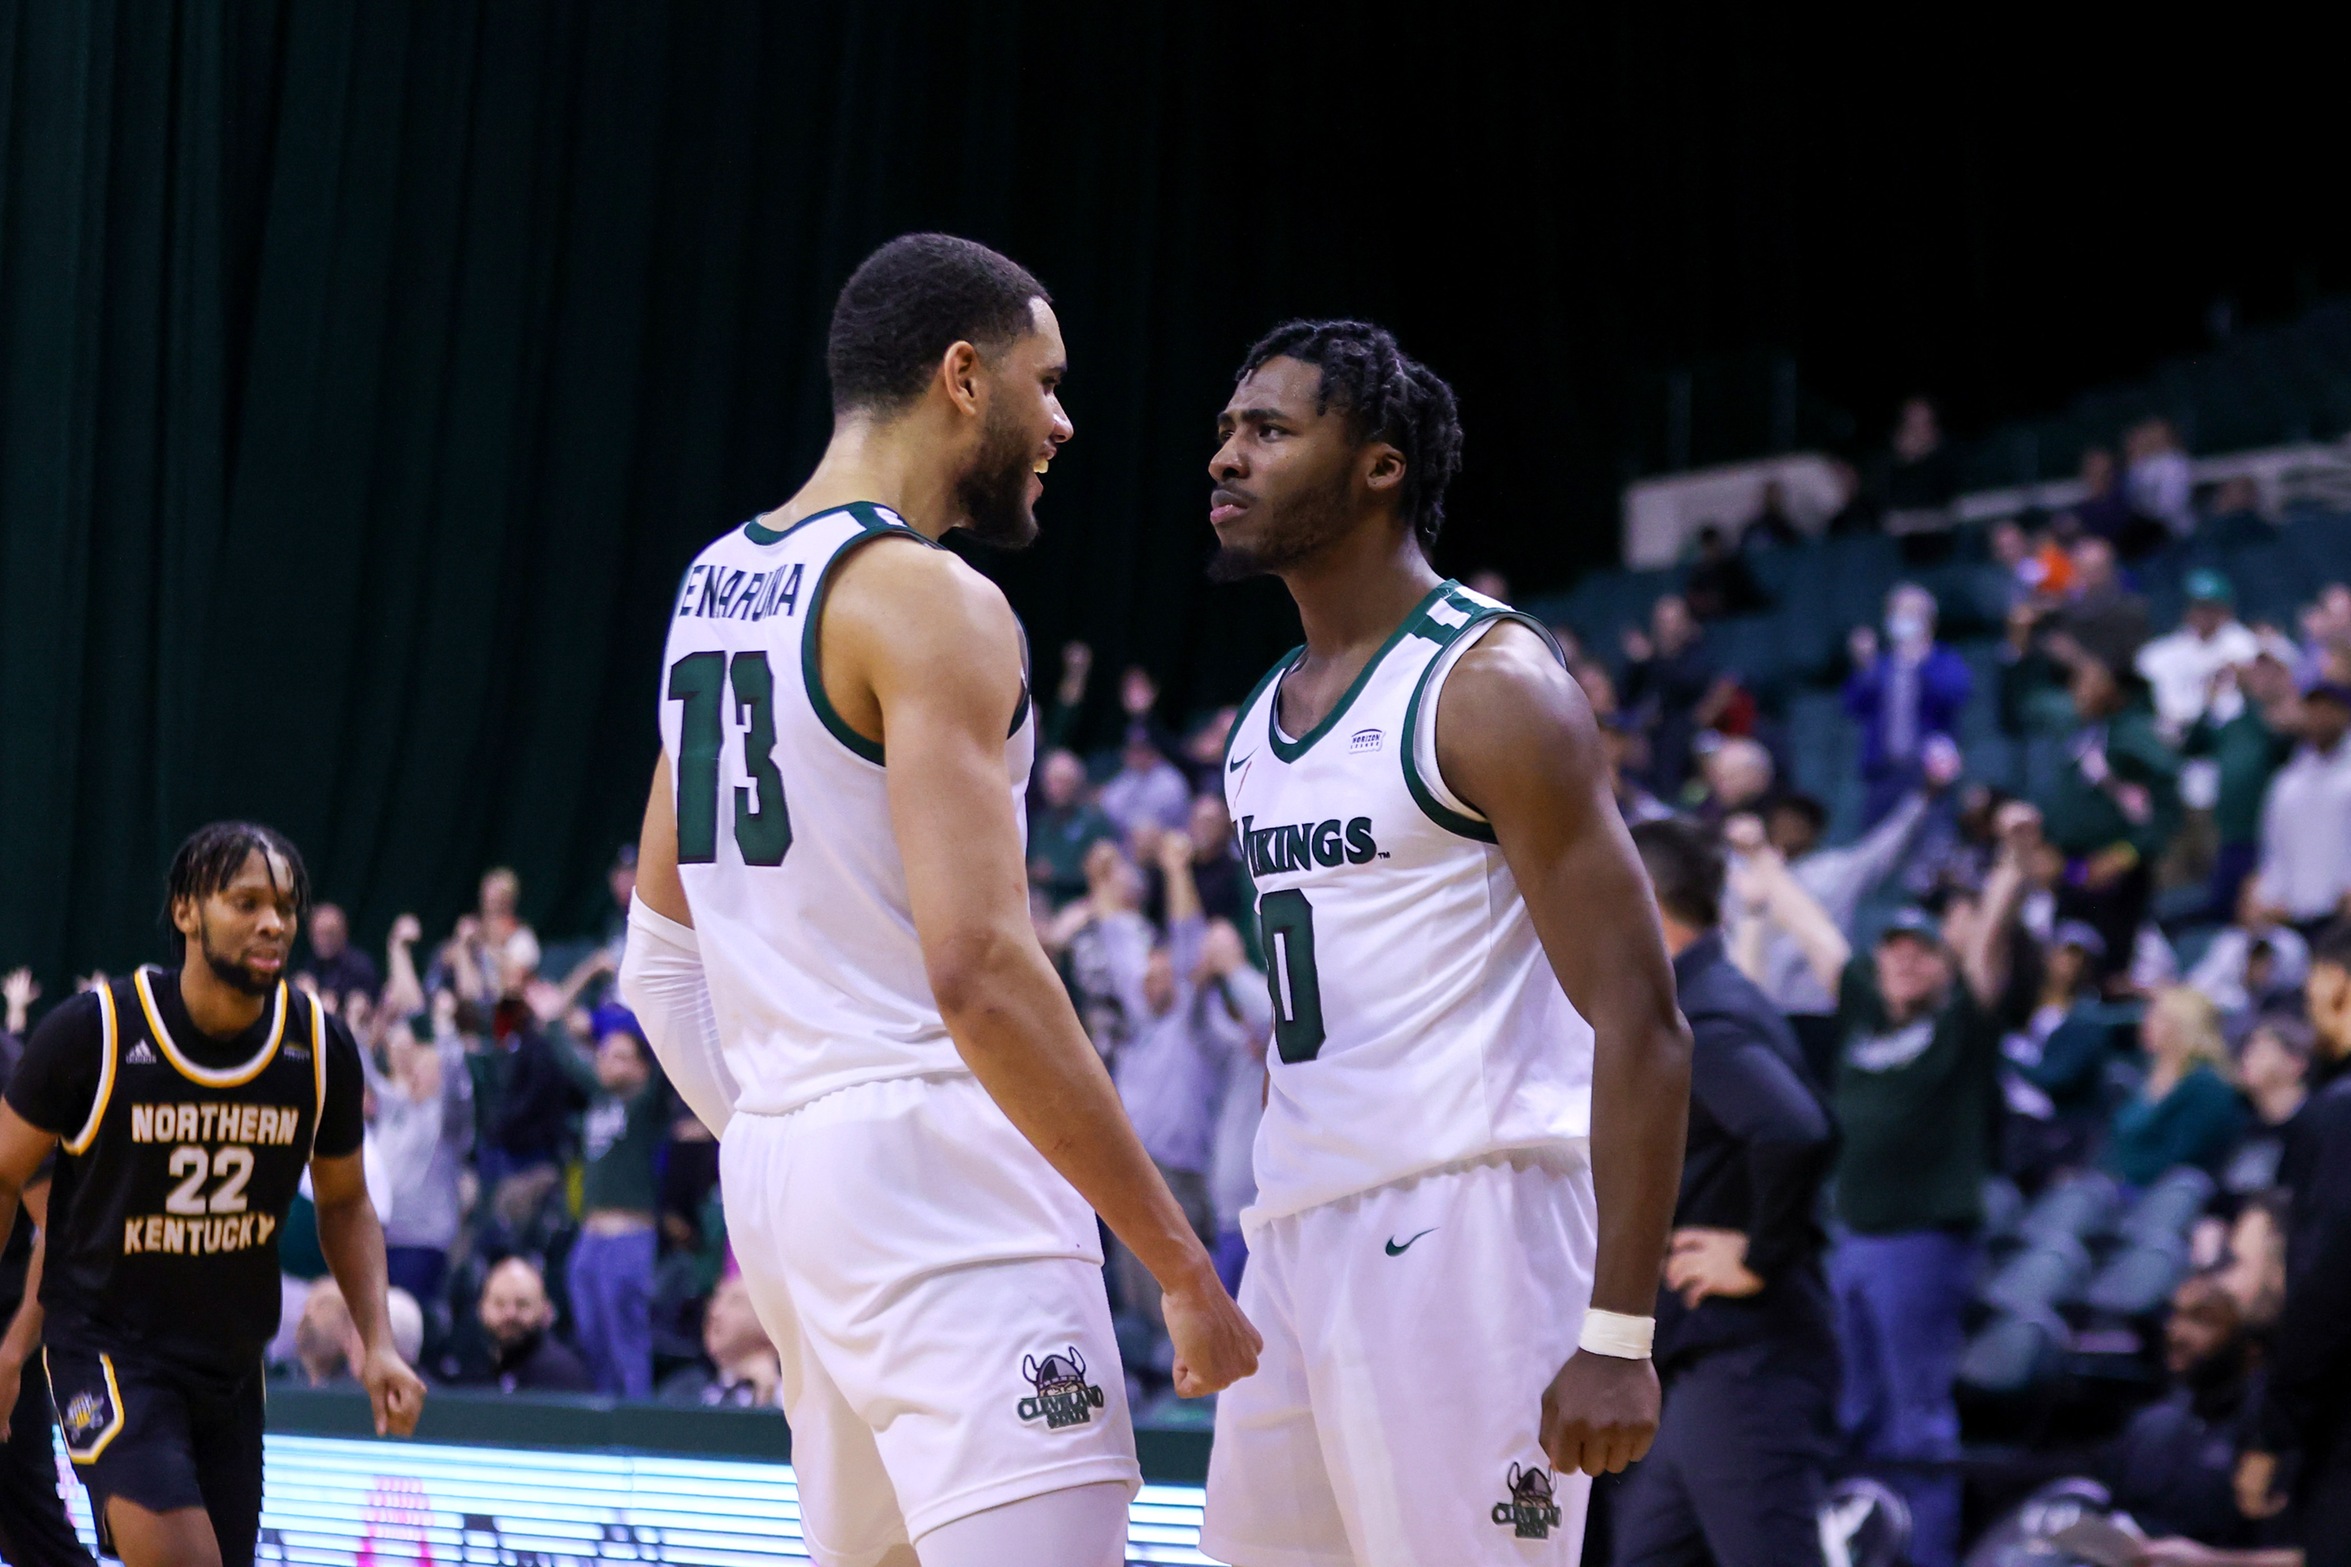 Cleveland State Men’s Basketball Defeats Northern Kentucky in Overtime Thriller